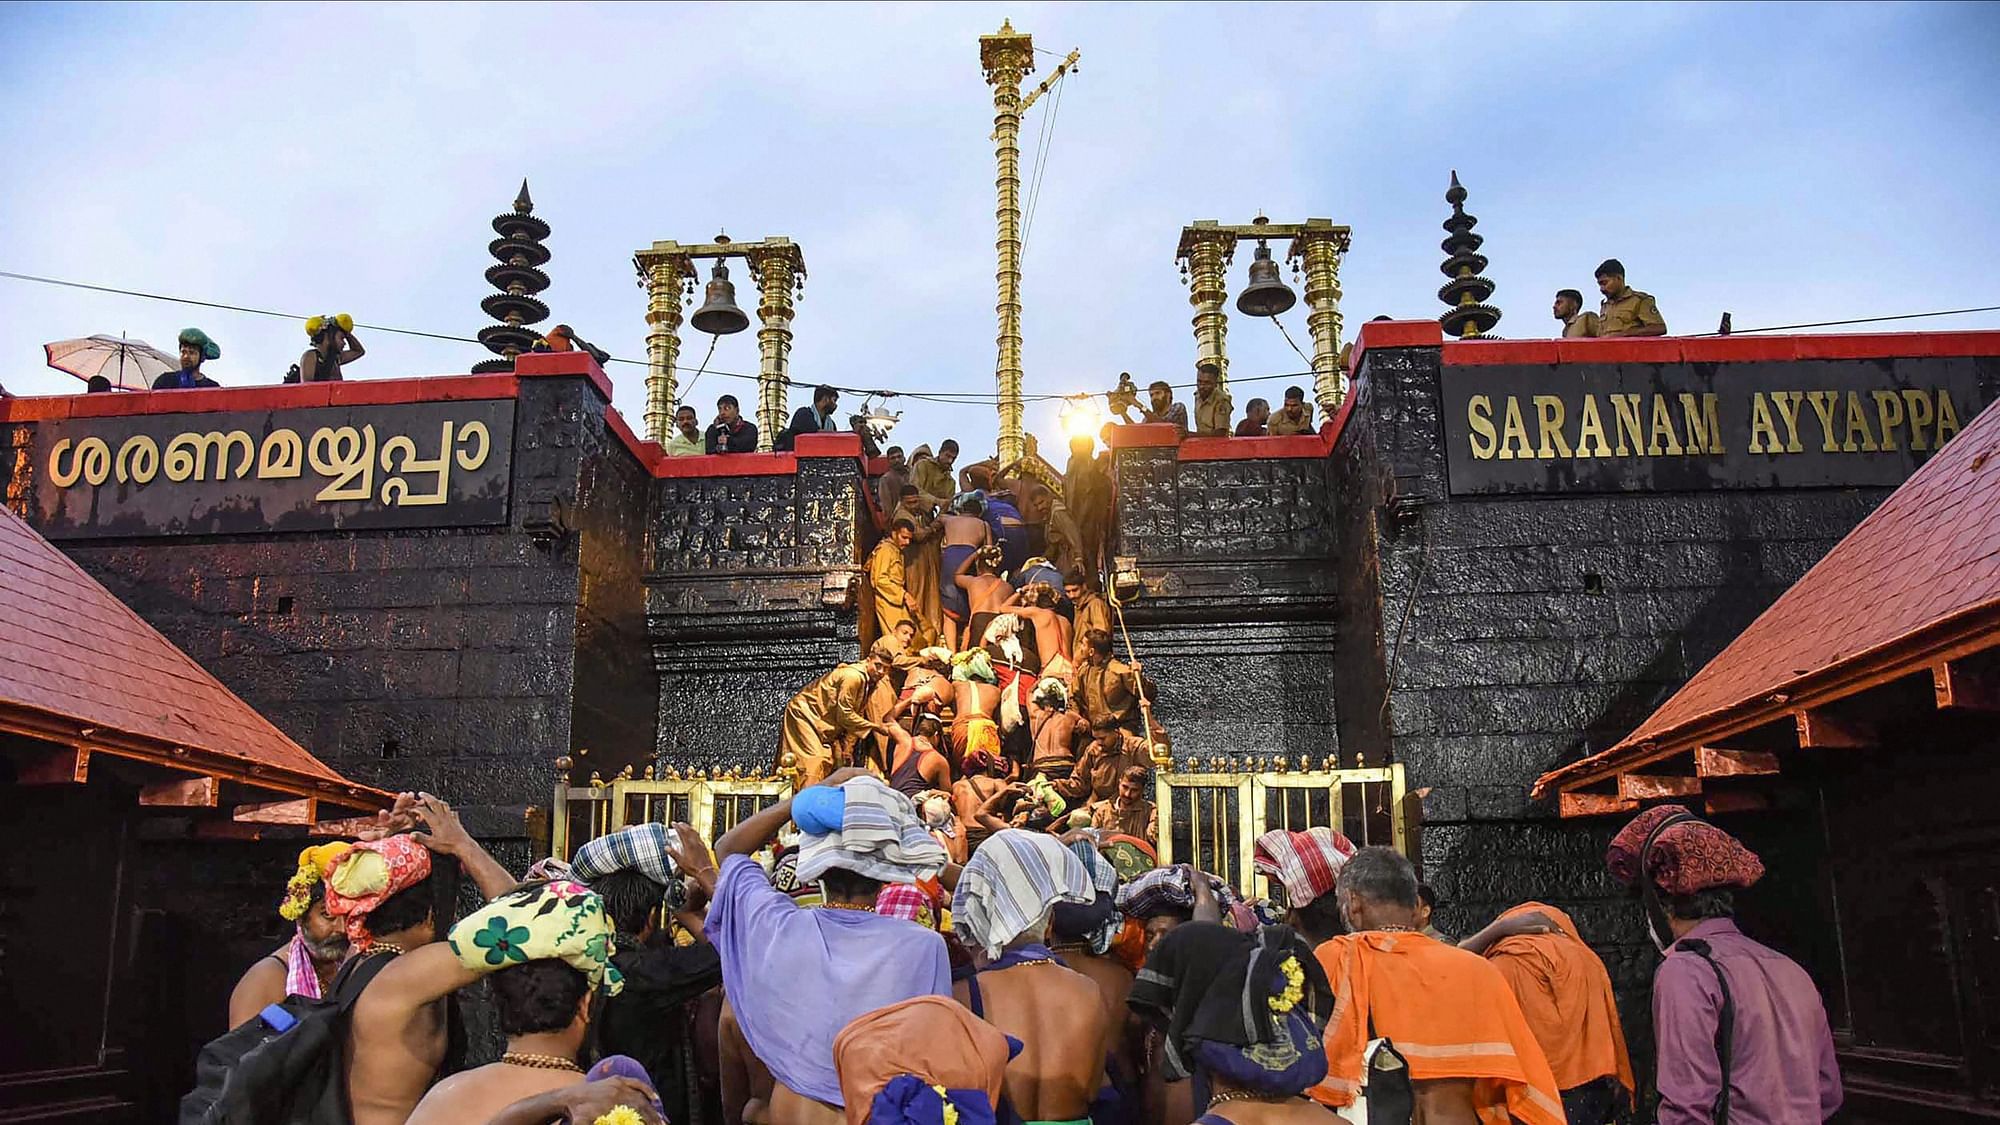 Sabarimala SC Verdict LIVE Updates: The Supreme Court decided to refer the Sabarimala case to a larger, seven-judge bench.